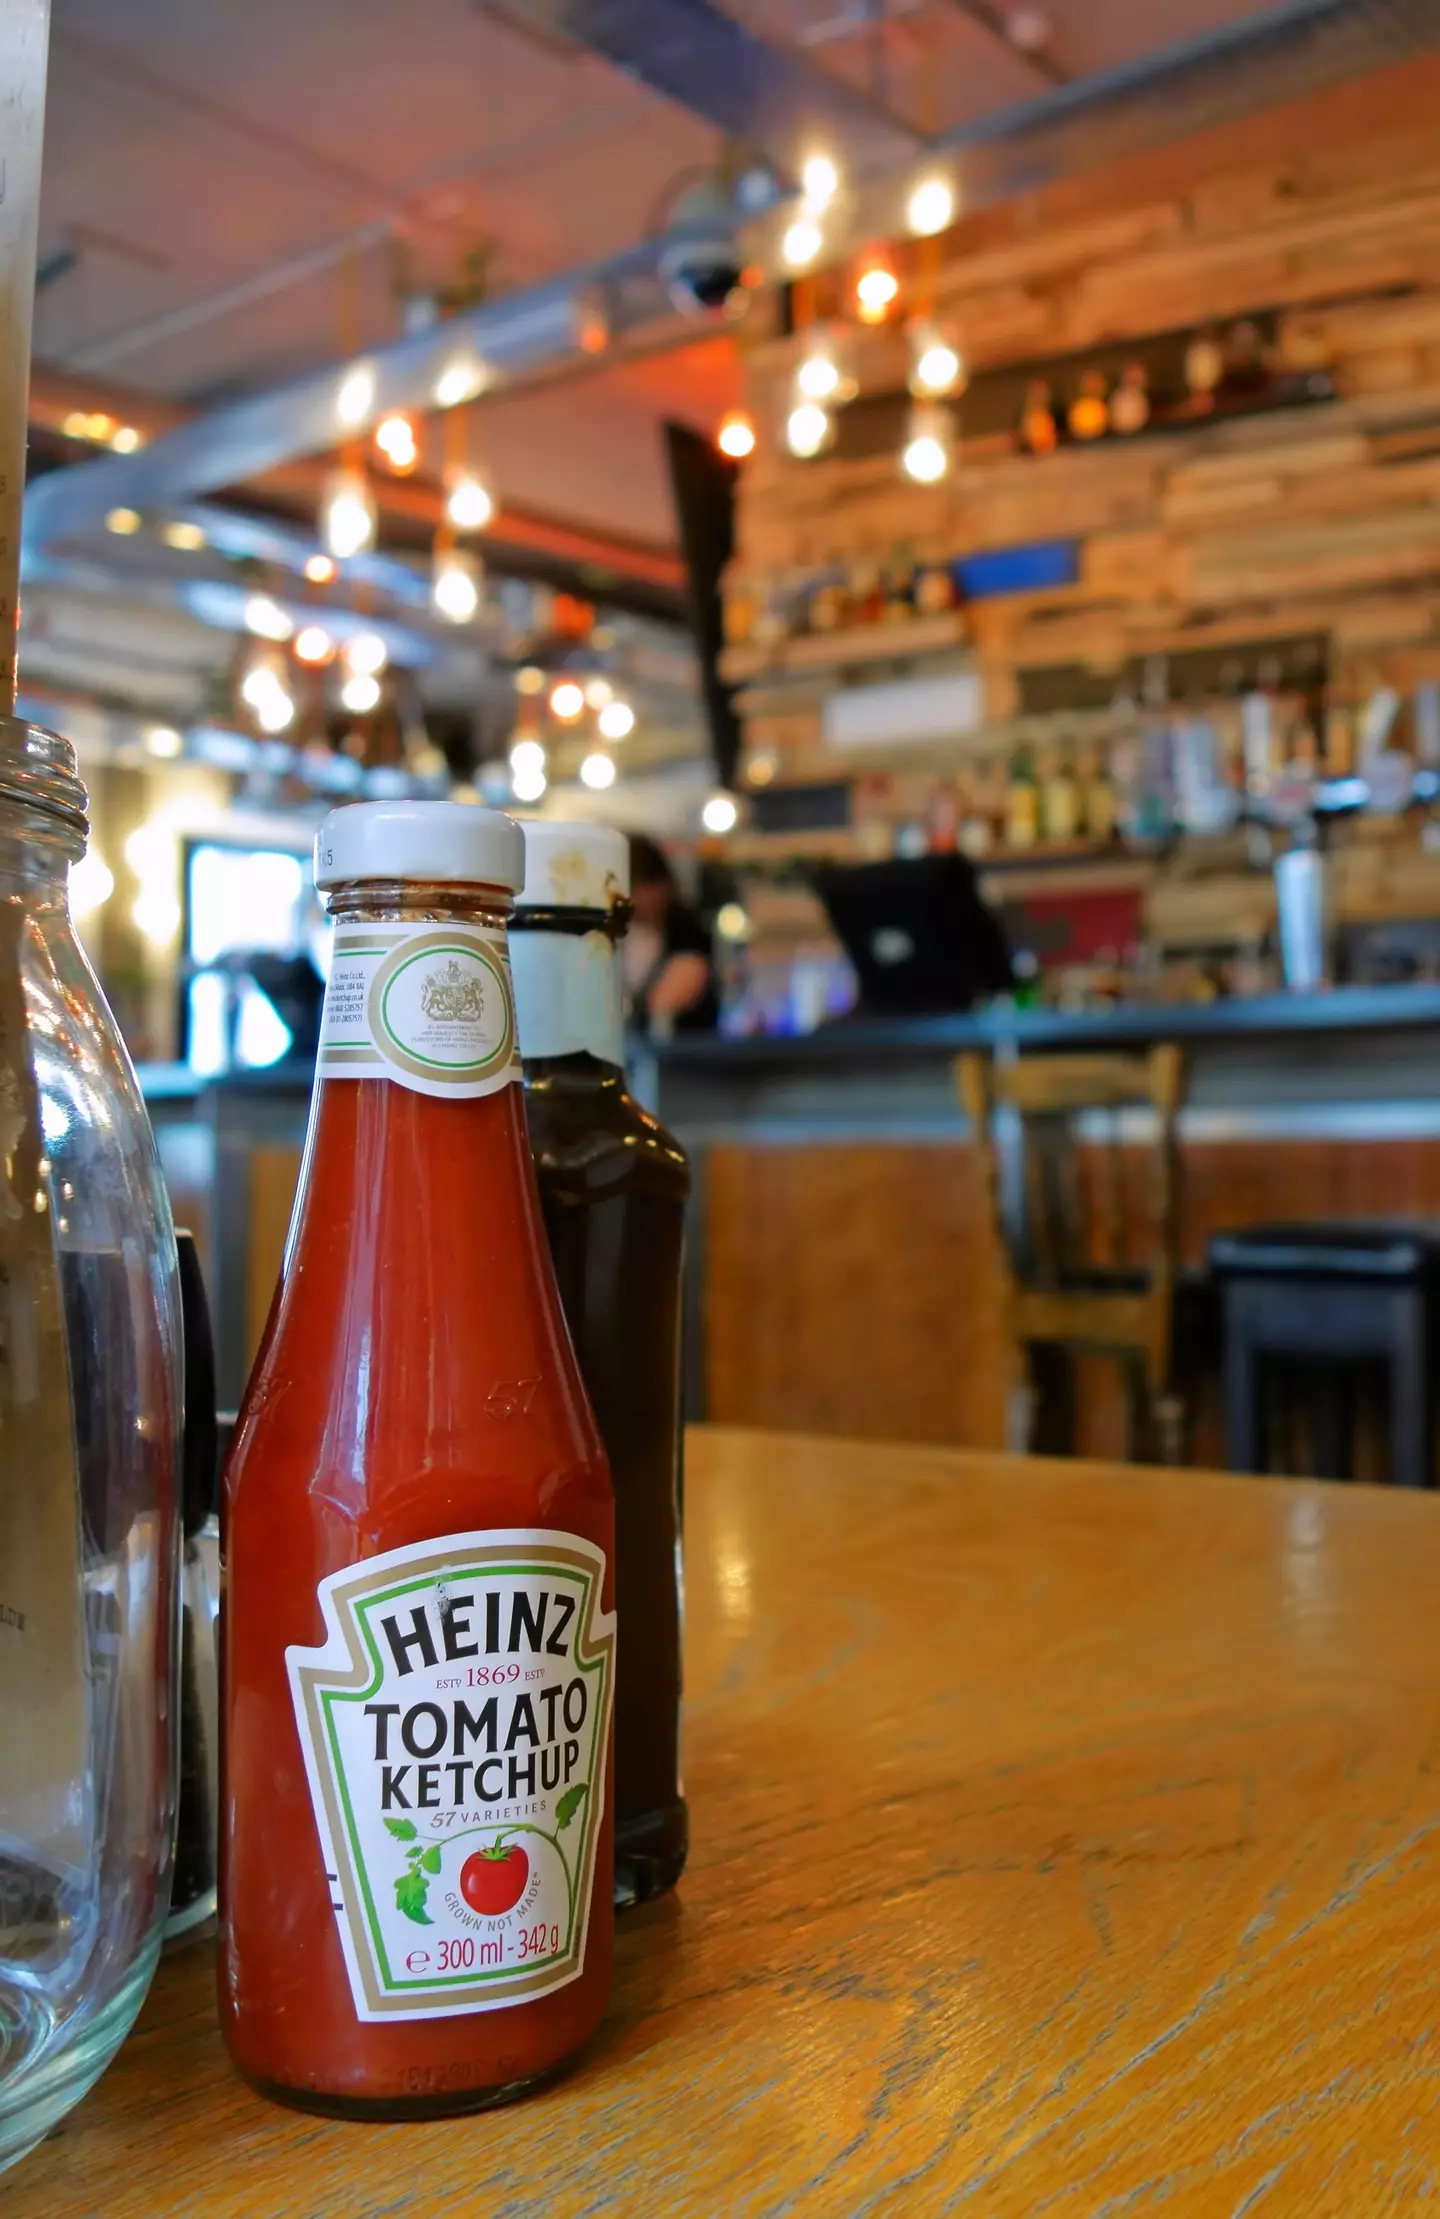 Heinz will need to change the design of its famous ketchup bottle.